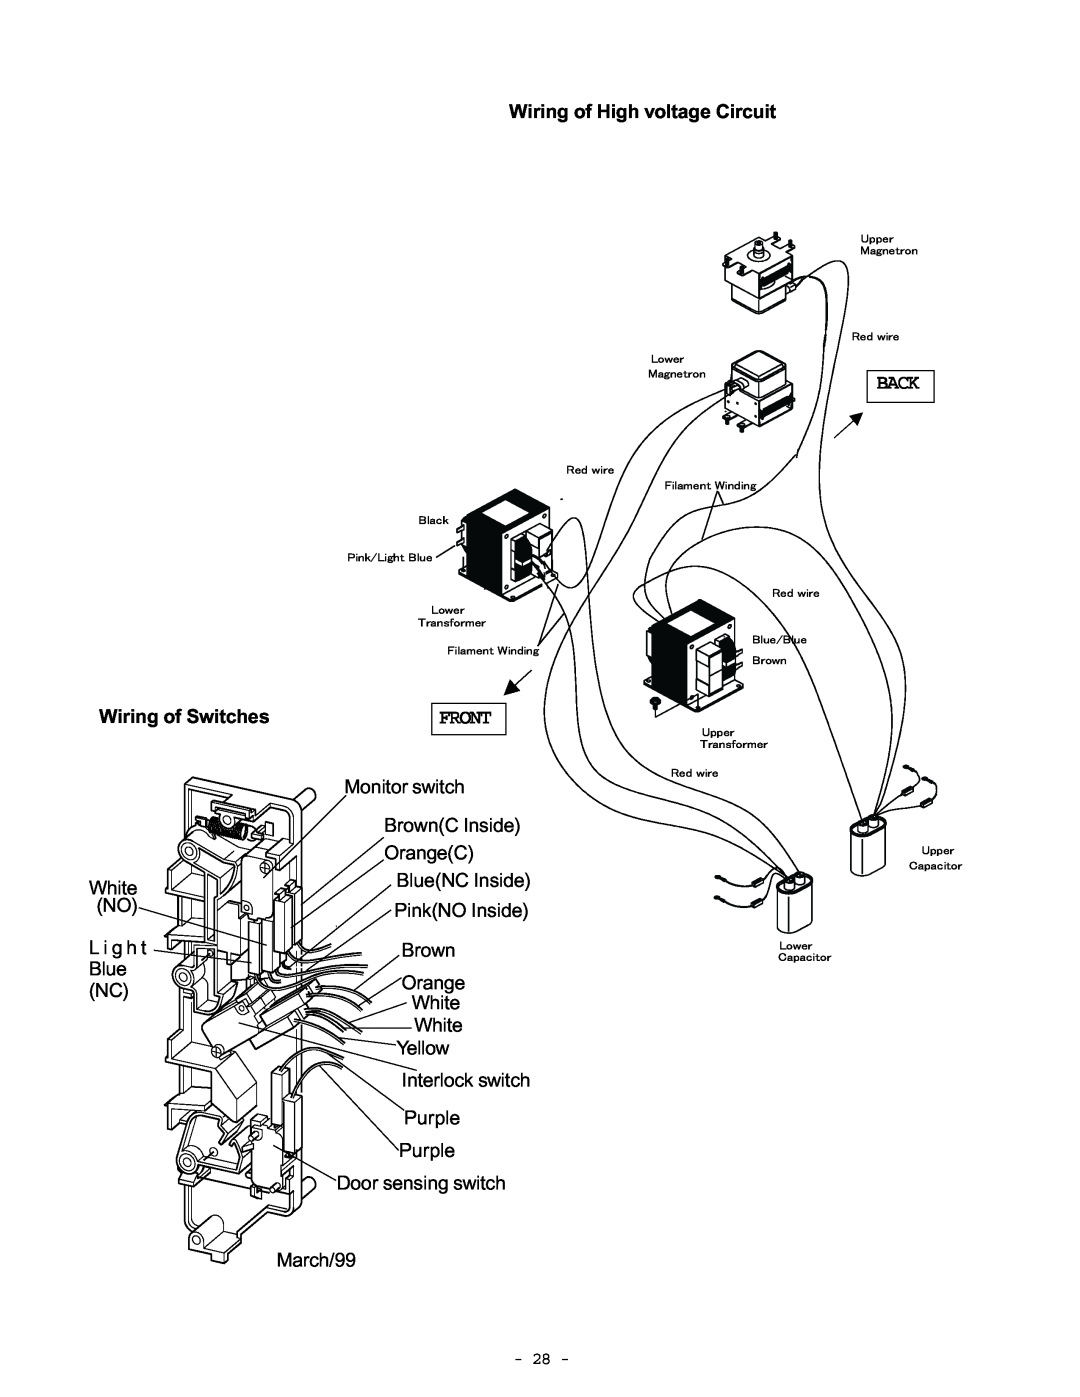 Garland EM-C180 service manual Wiring of High voltage Circuit, Back, Wiring of Switches, Front 